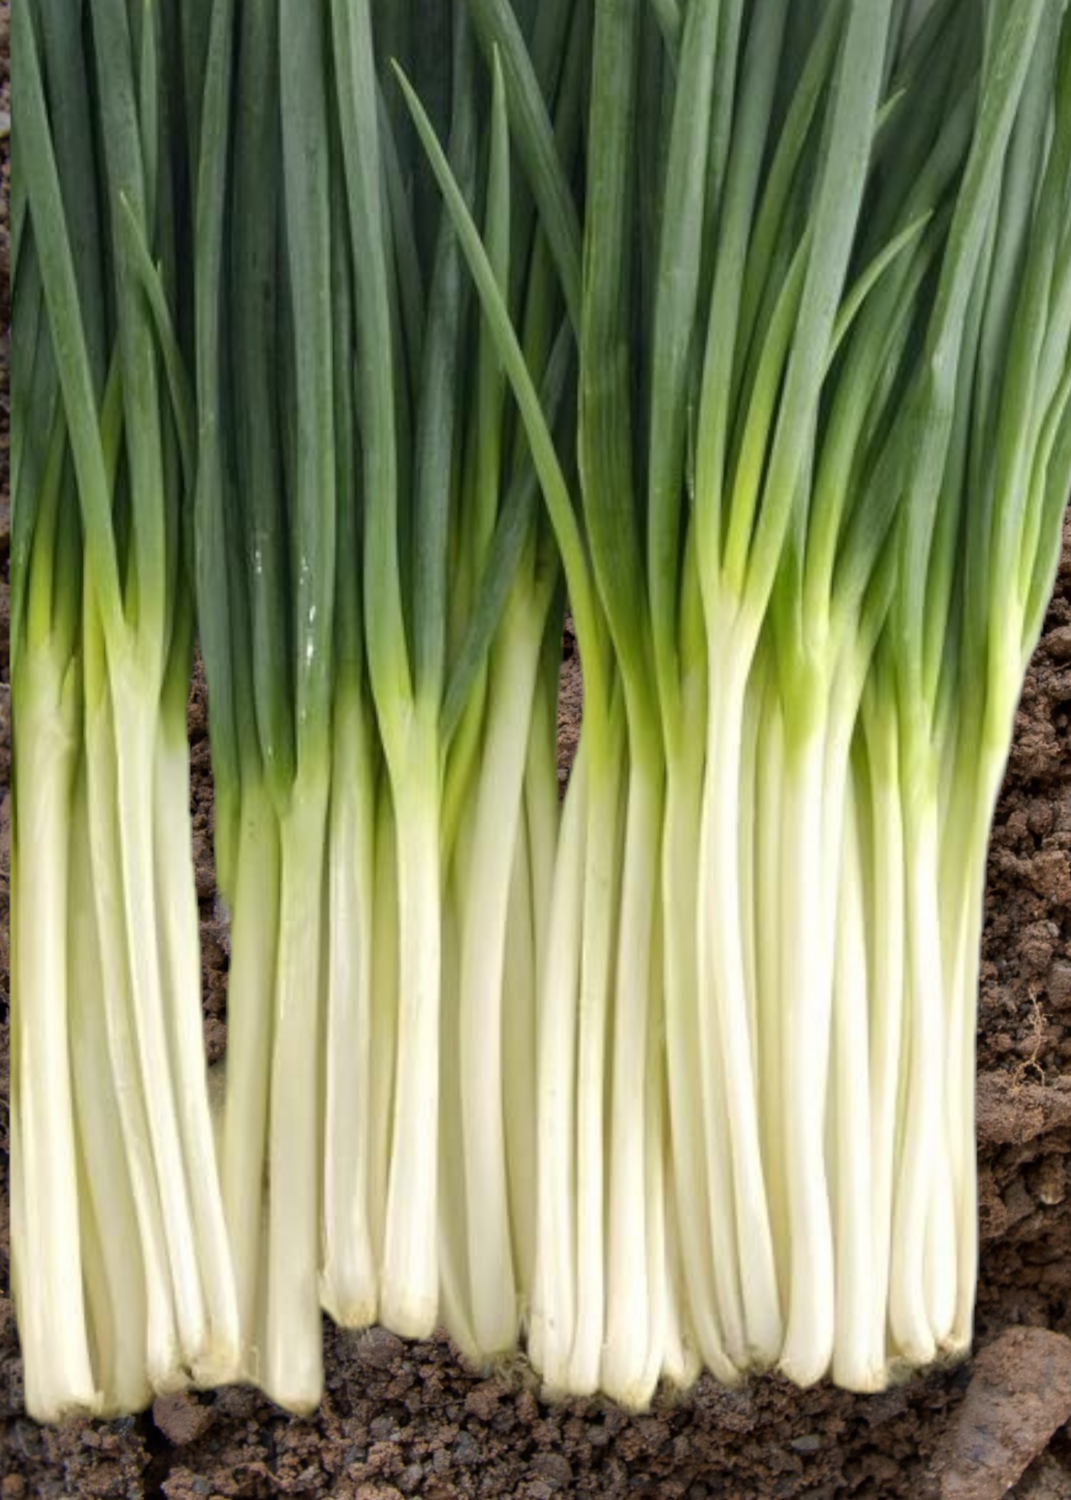 Southport White Hybrid Bunching Onion Seeds